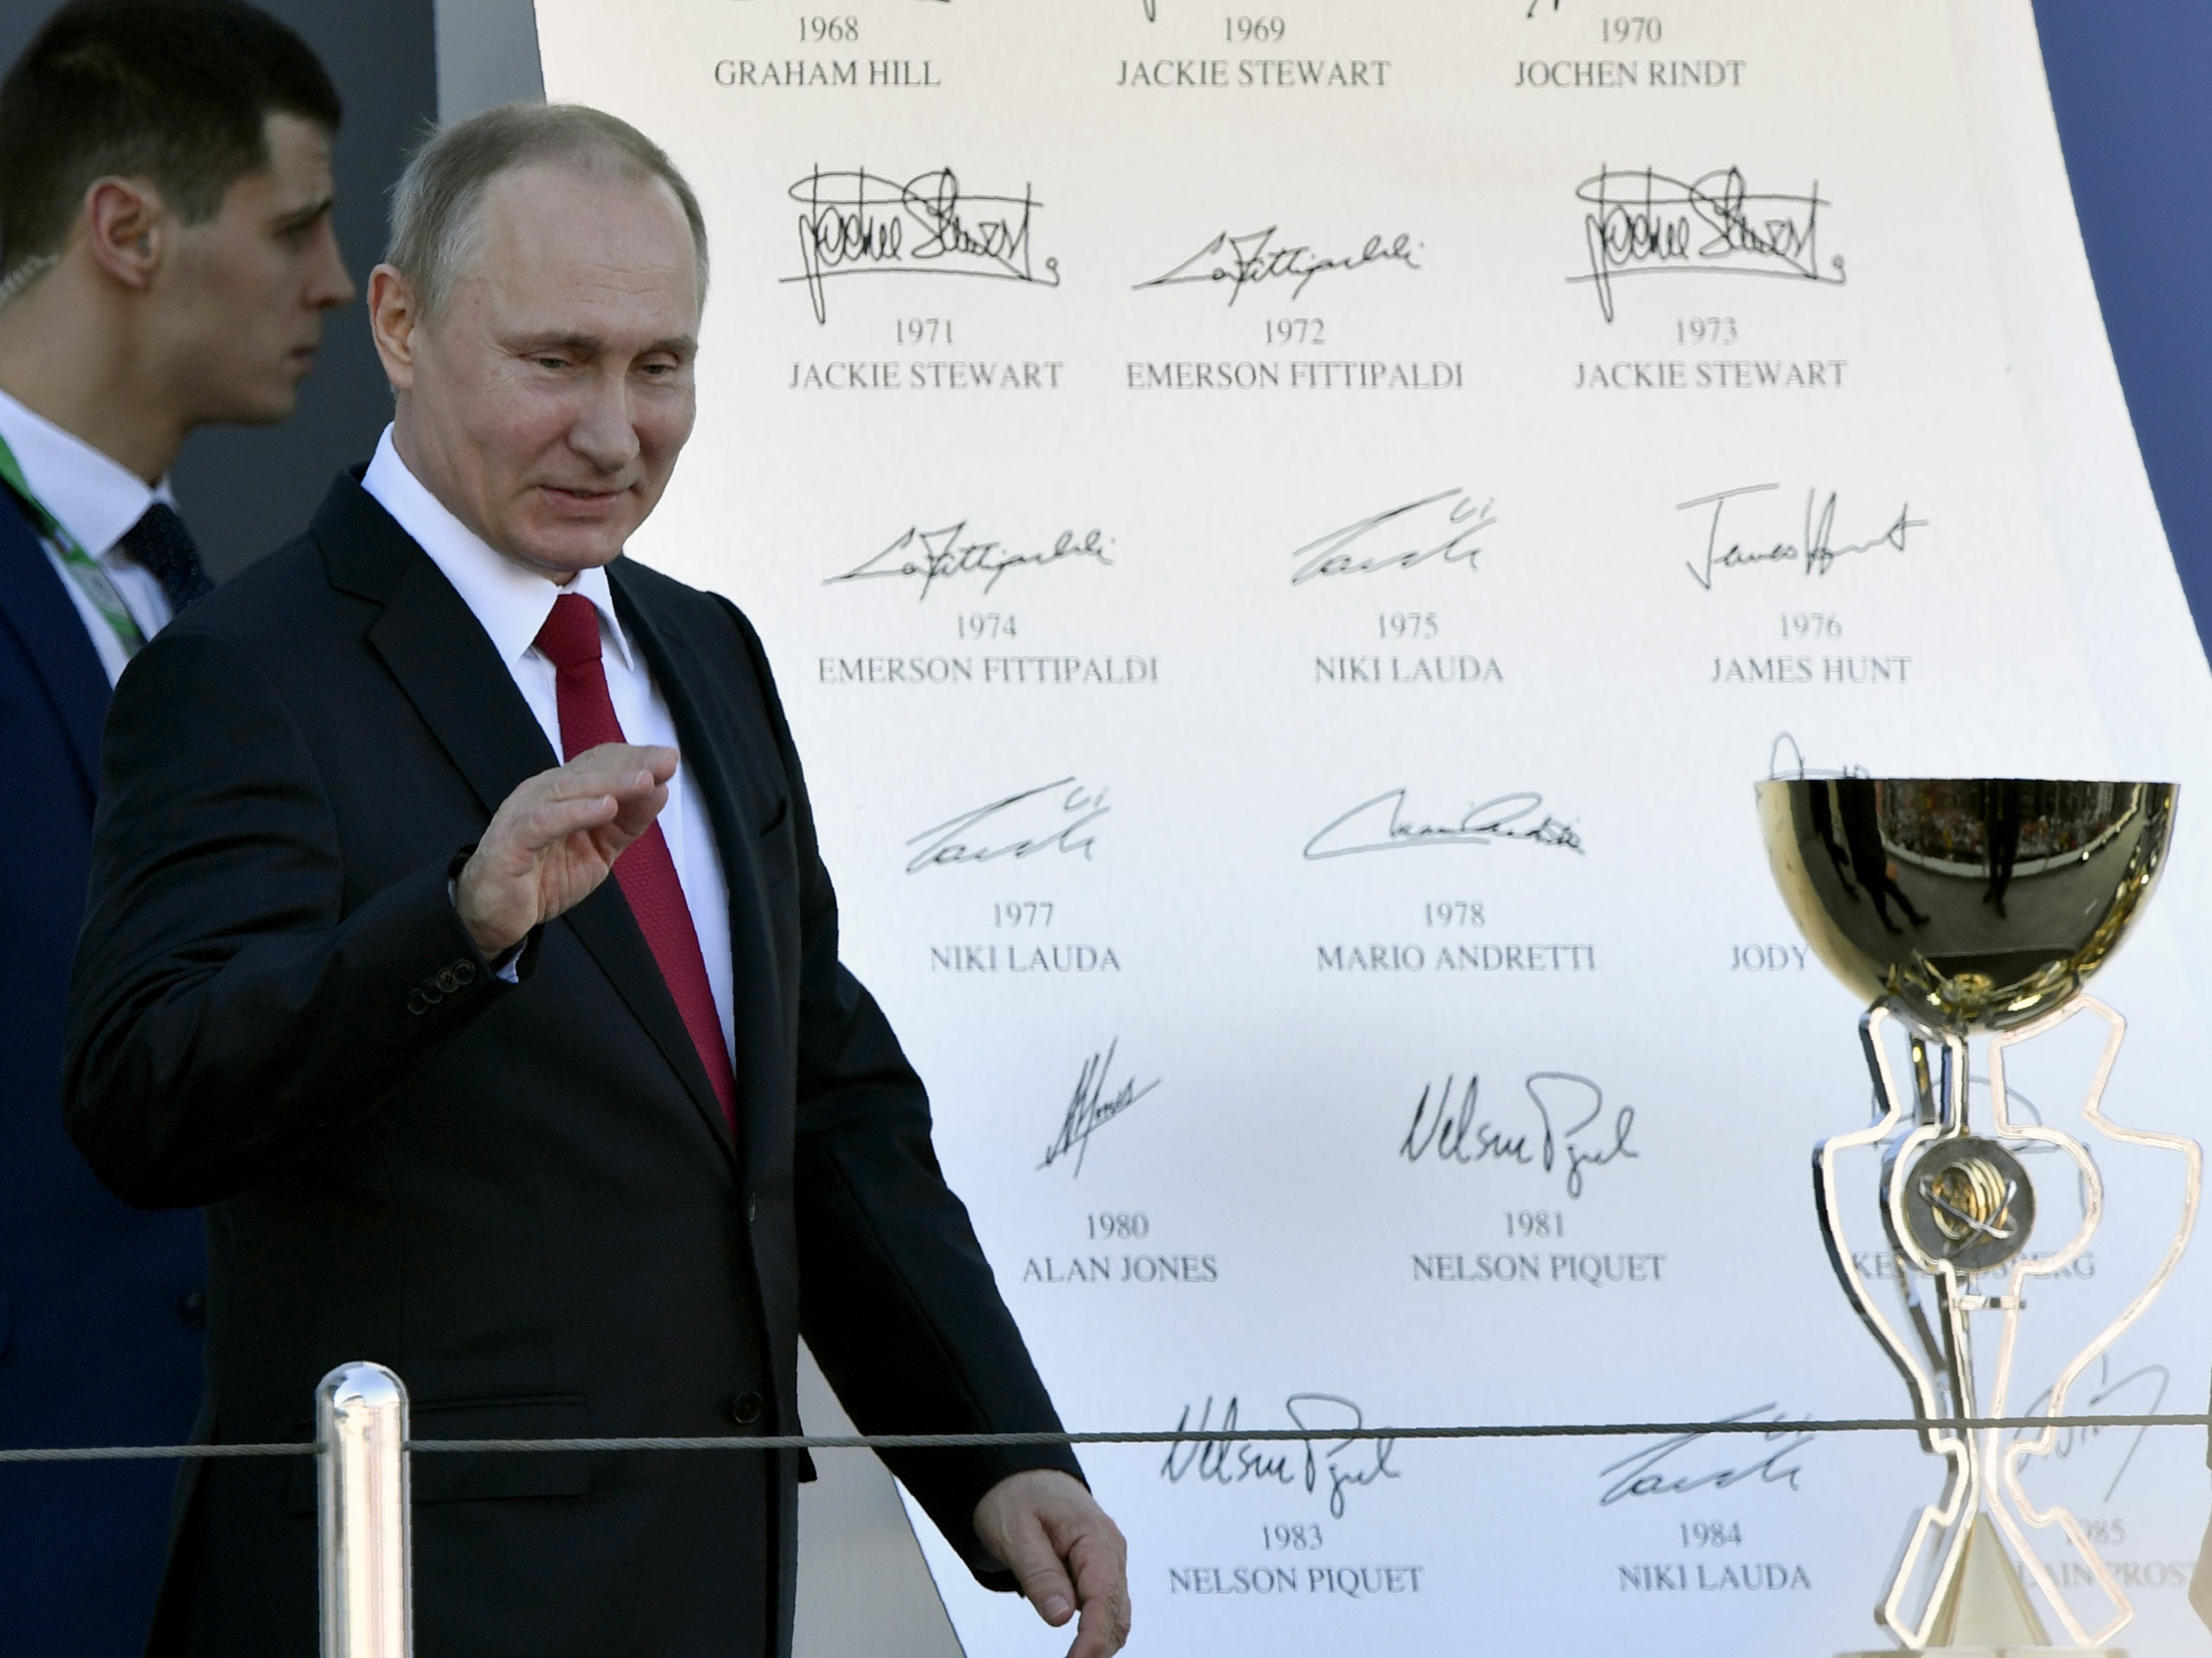 Vladimir Putin presents the trophy at the Russian Grand Prix in 2017